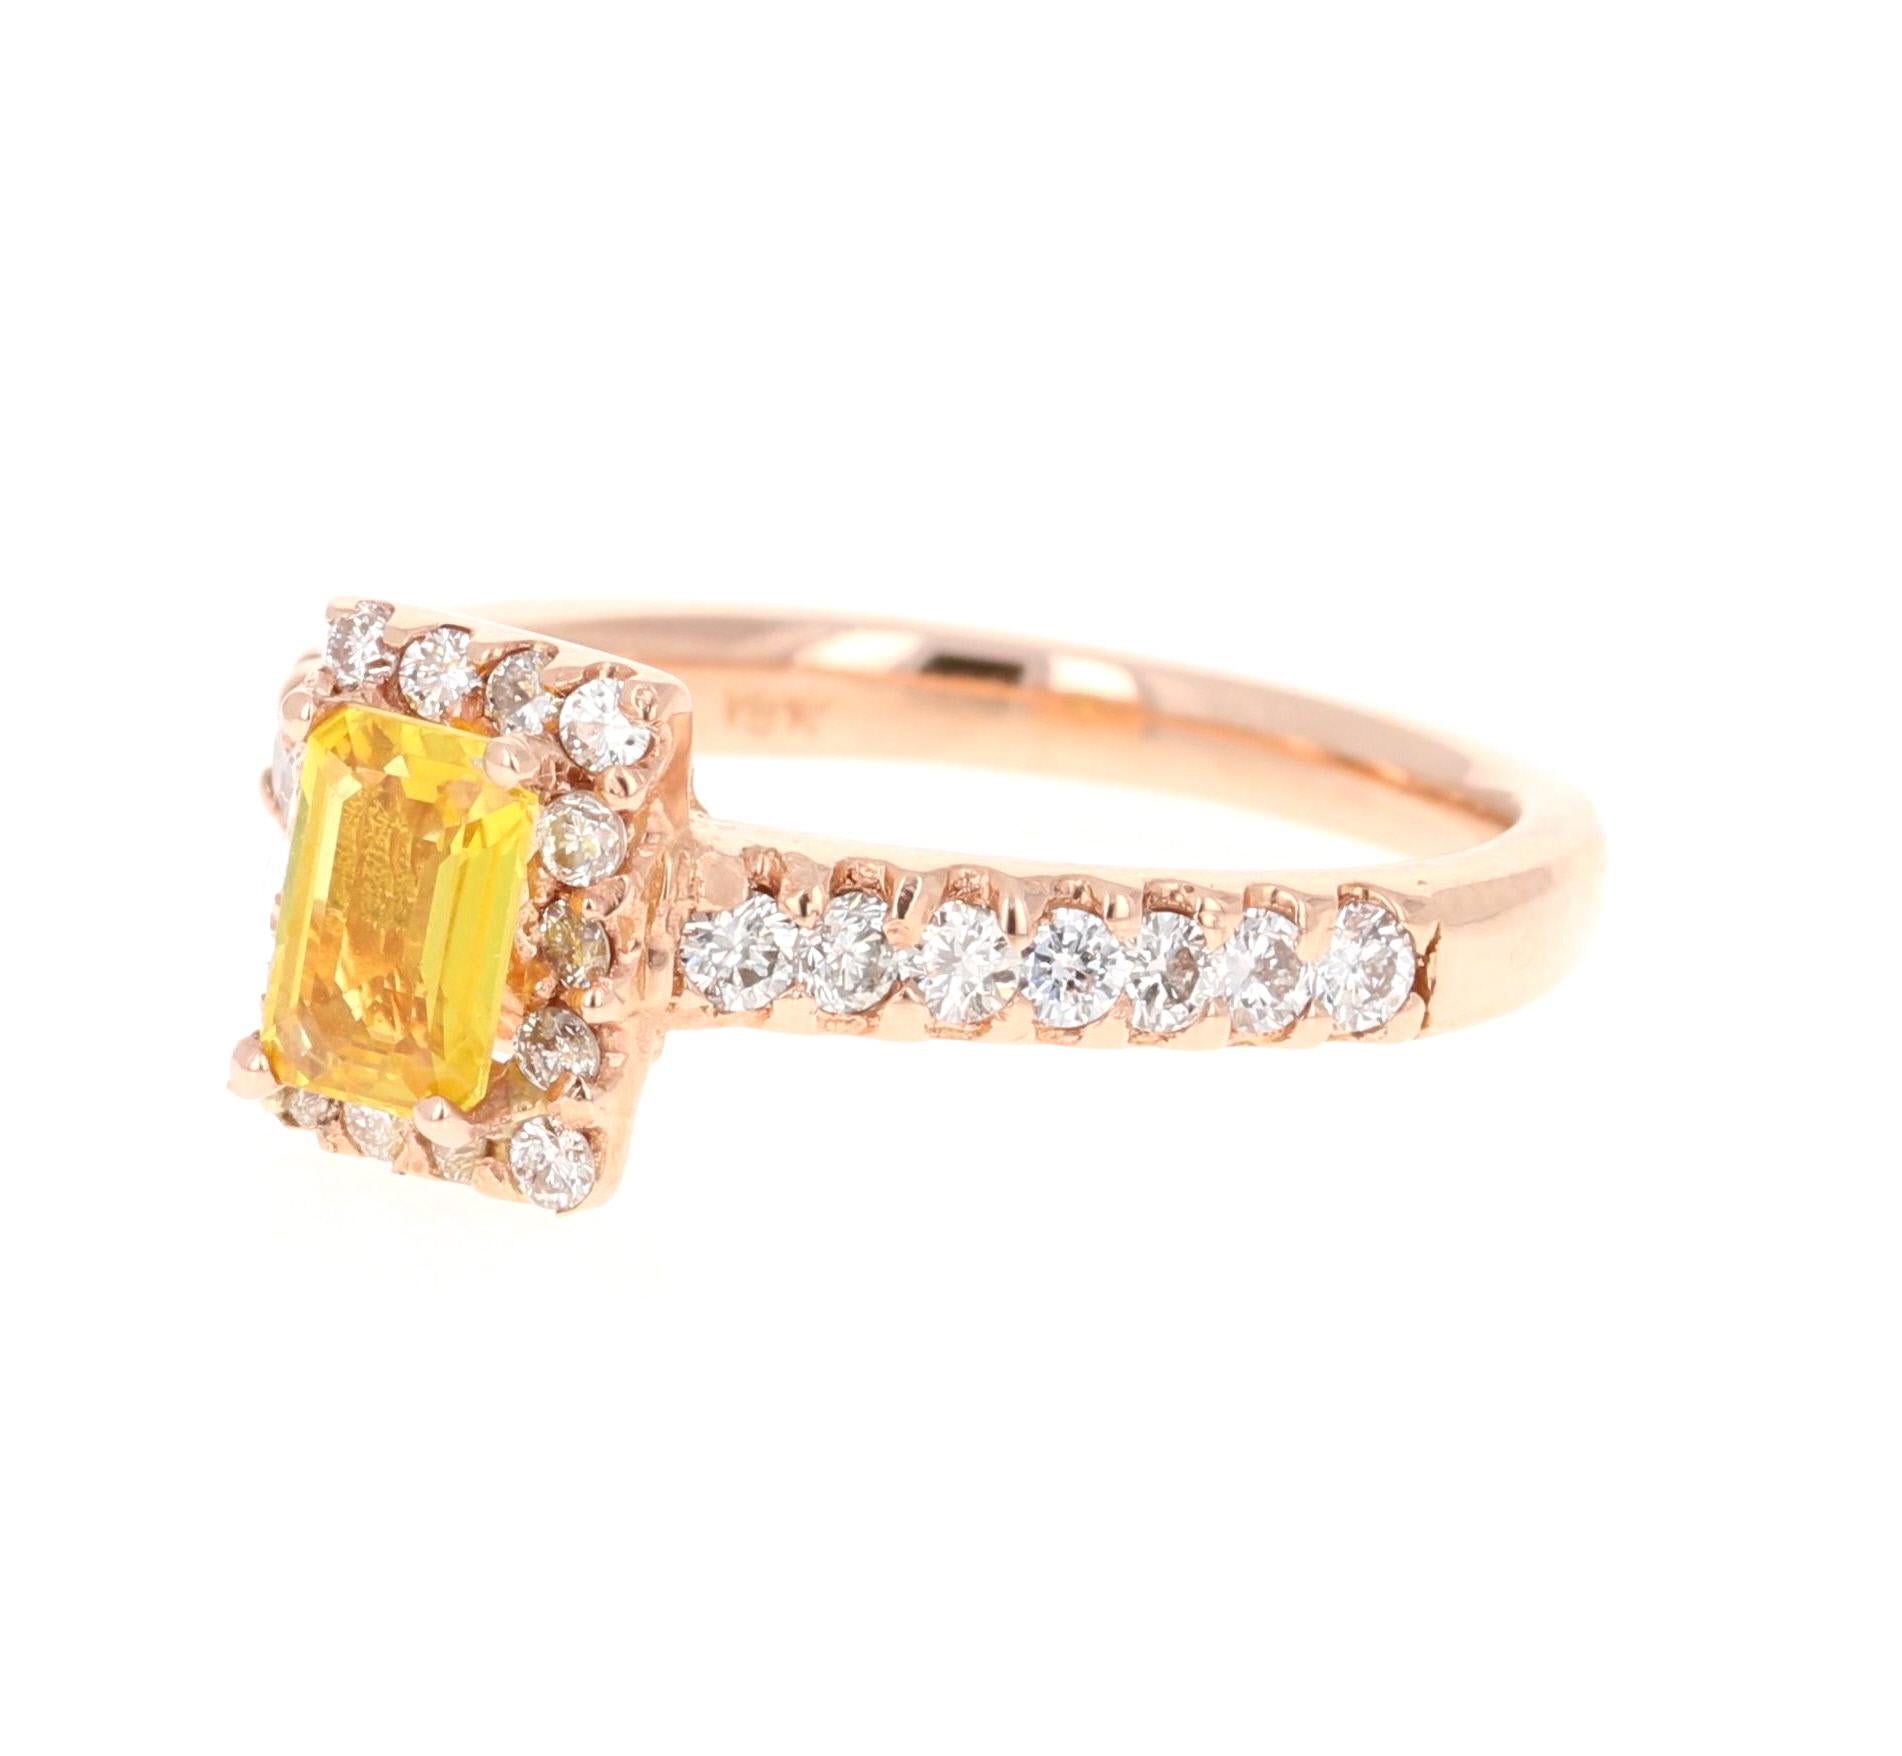 This ring has a Emerald Cut Yellow Sapphire that weighs 0.62 Carats and is surrounded by 28 Round Cut Diamonds that weigh 0.54 Carats. The Total Carat Weight of the ring is 1.16 Carats. 

The ring is set in a cute 18 Karat Rose Gold setting, with an